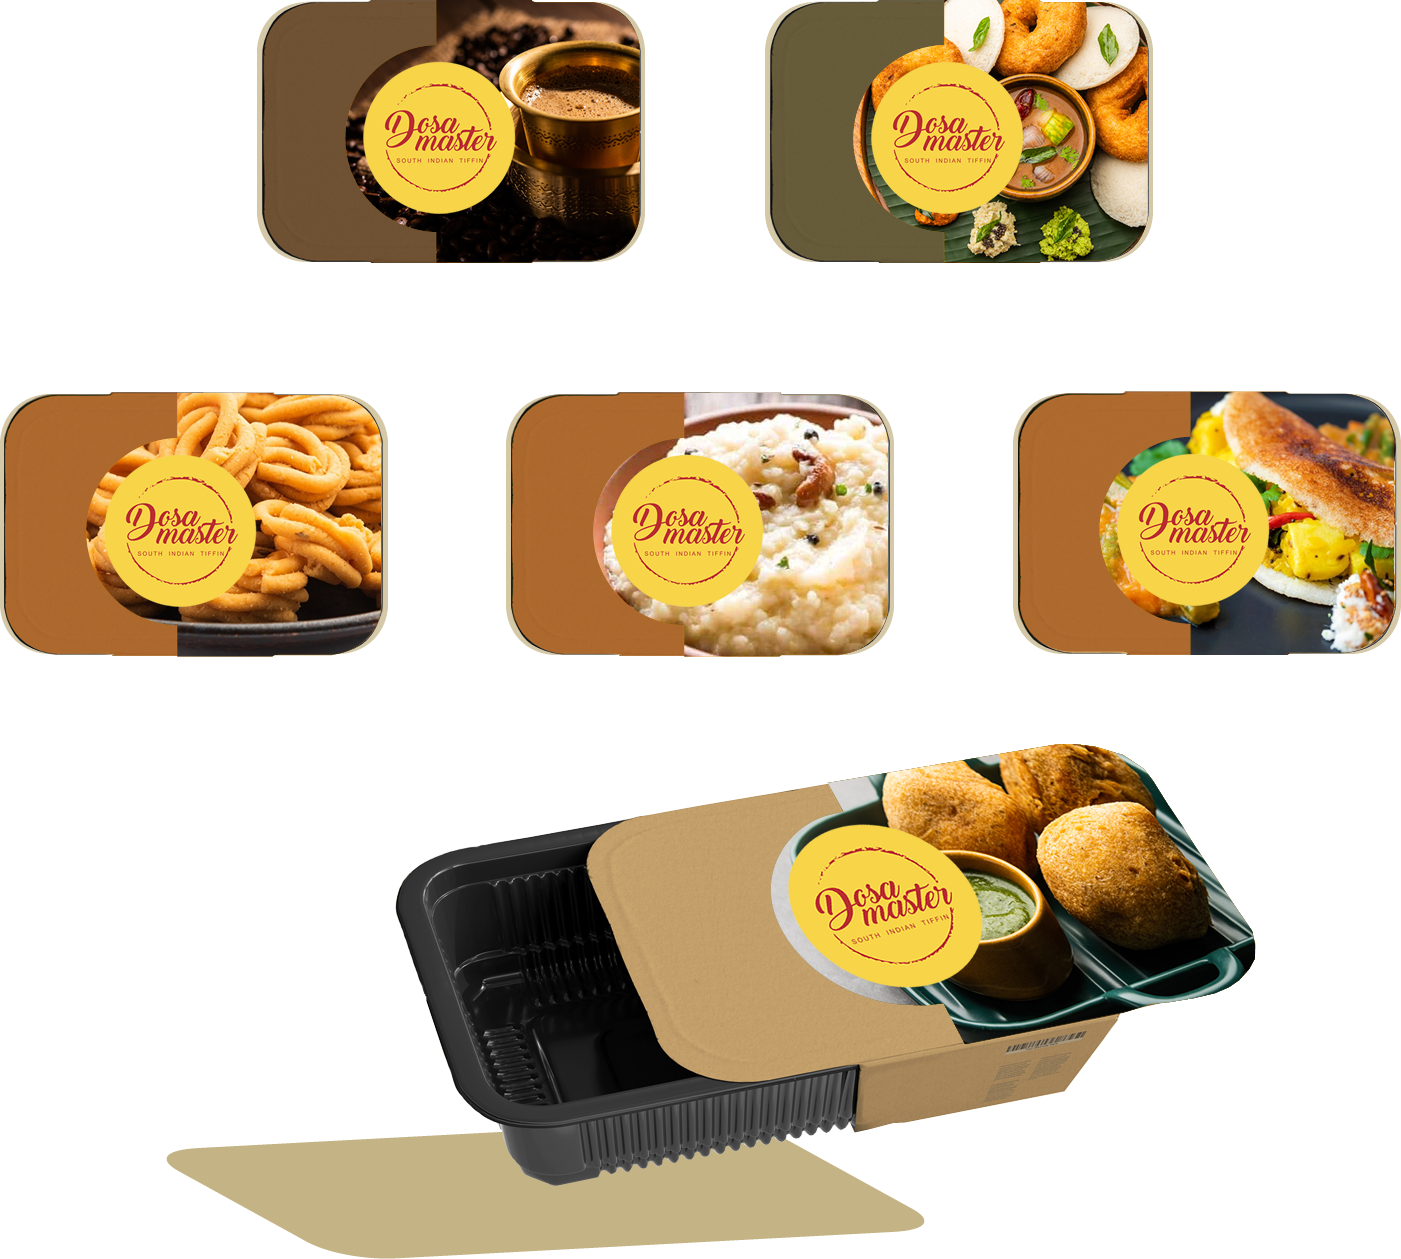 Branding mugs, take-aways boxes and on mobile app of Dosa master